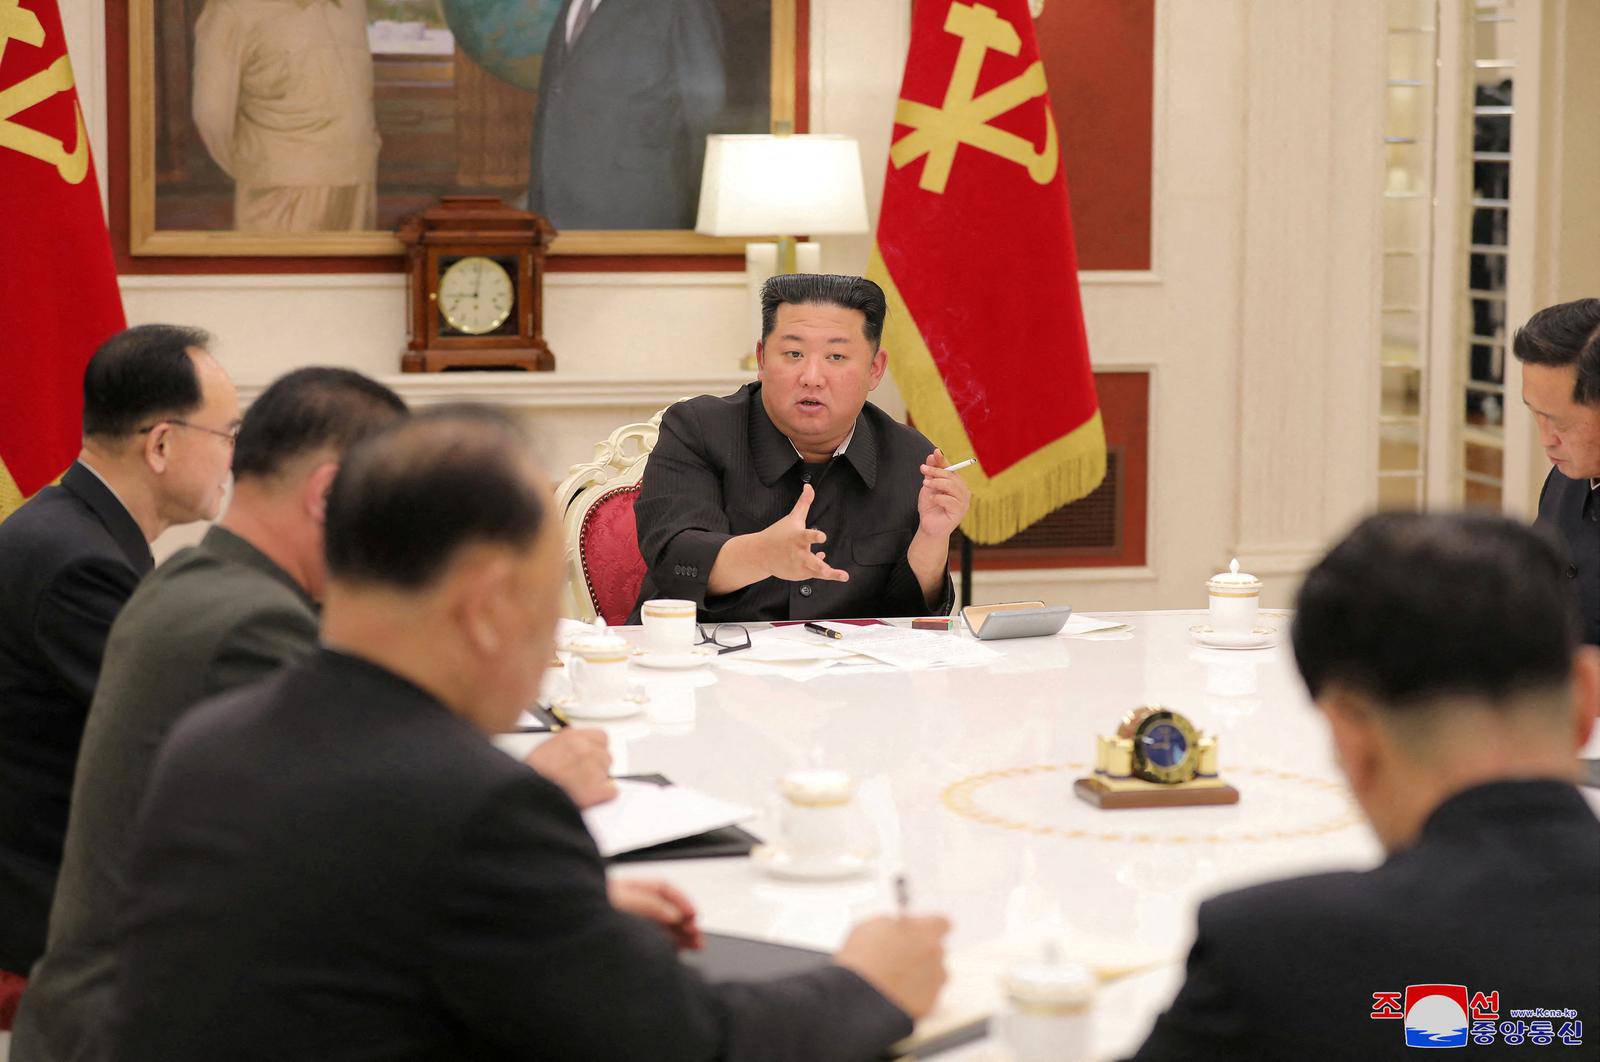 North Korean leader Kim Jong Un presides over a politburo meeting of the ruling Workers' Party